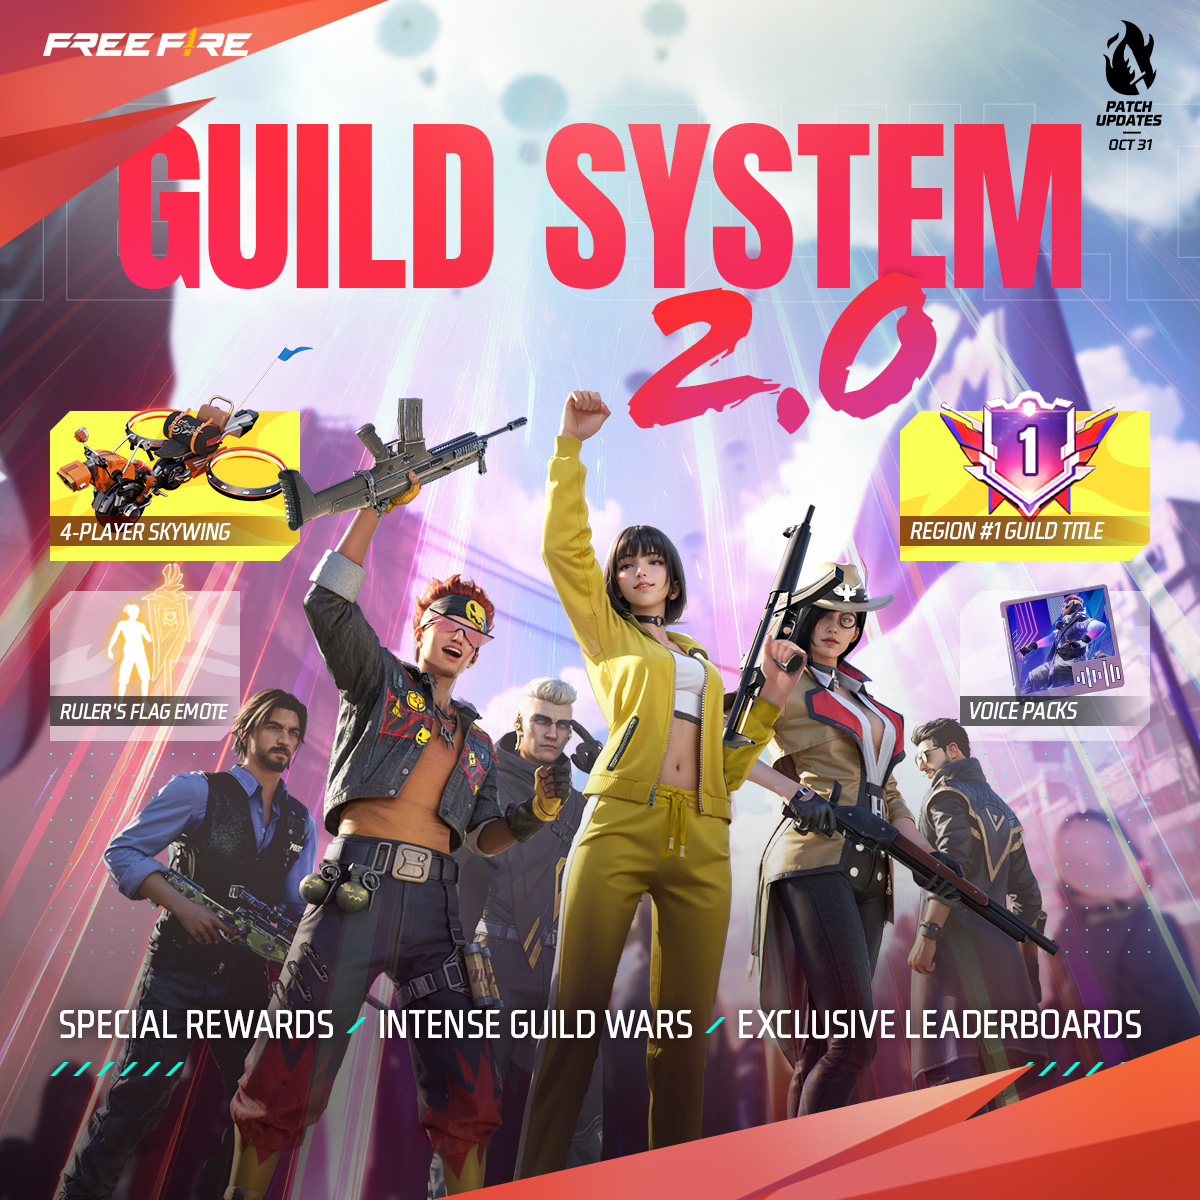 Guide to downloading the Free Fire online game and how to play it